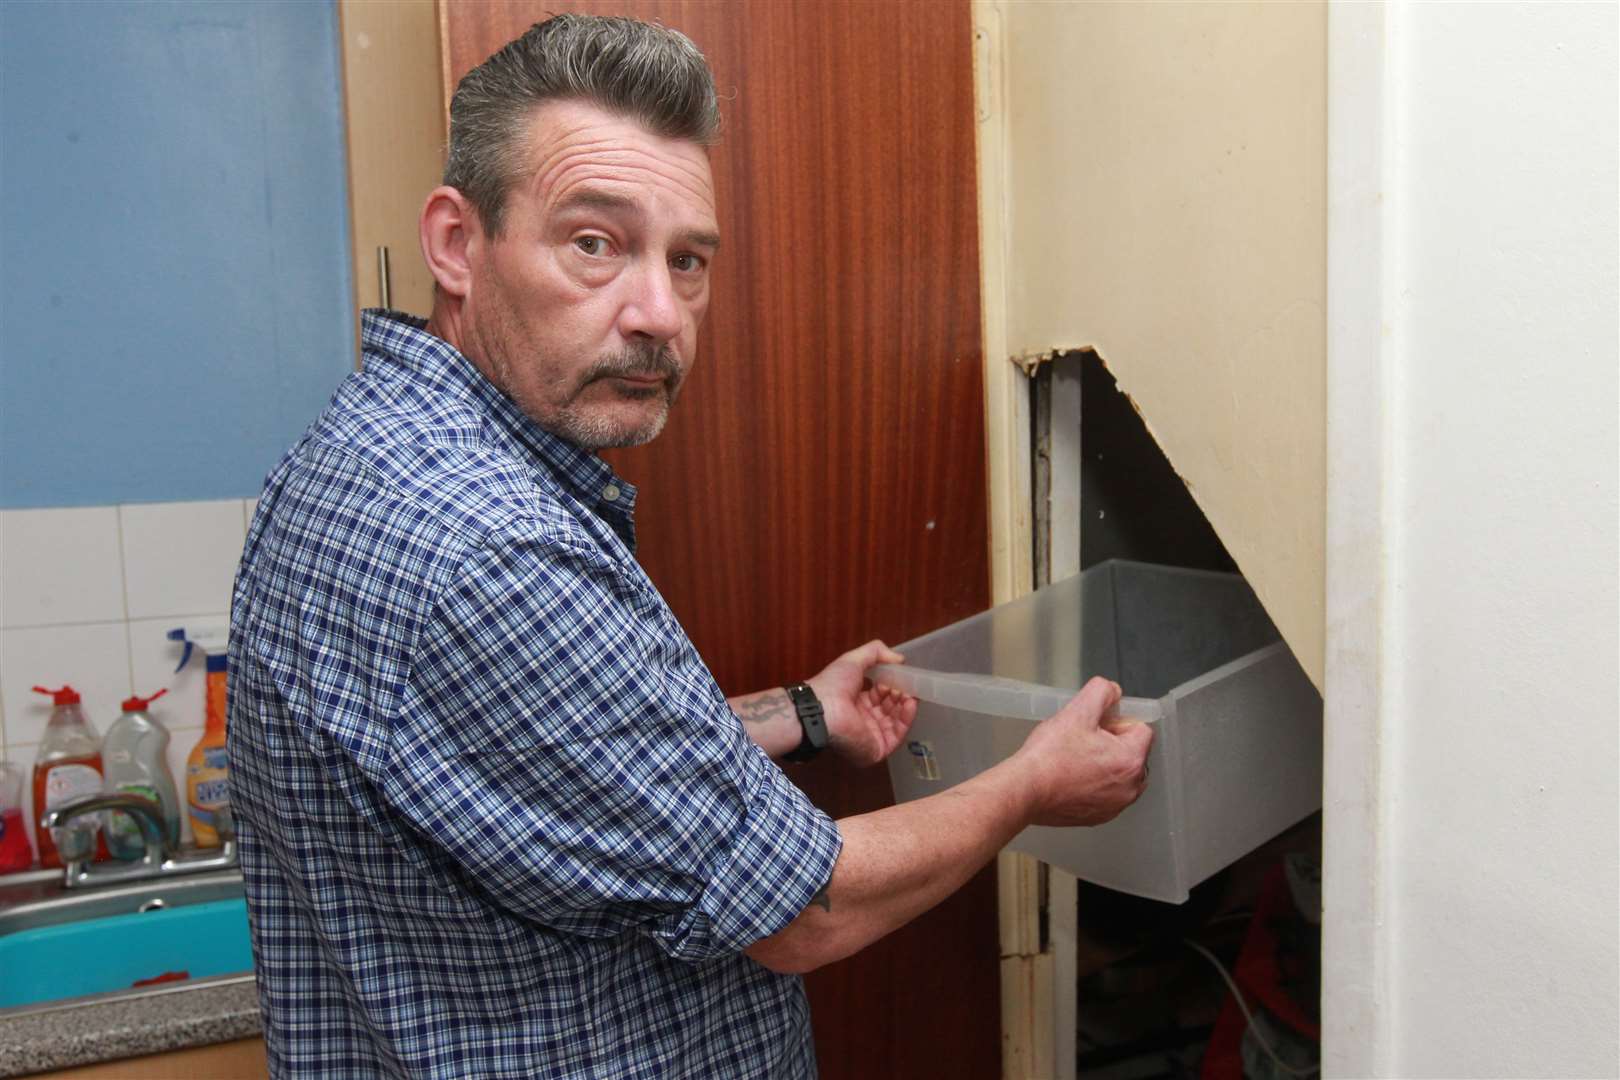 Stephen Care is extremely worried about the electrics coming into contact from leaky pipes from the water tank in his flat. Picture: John Westhrop. (11079375)